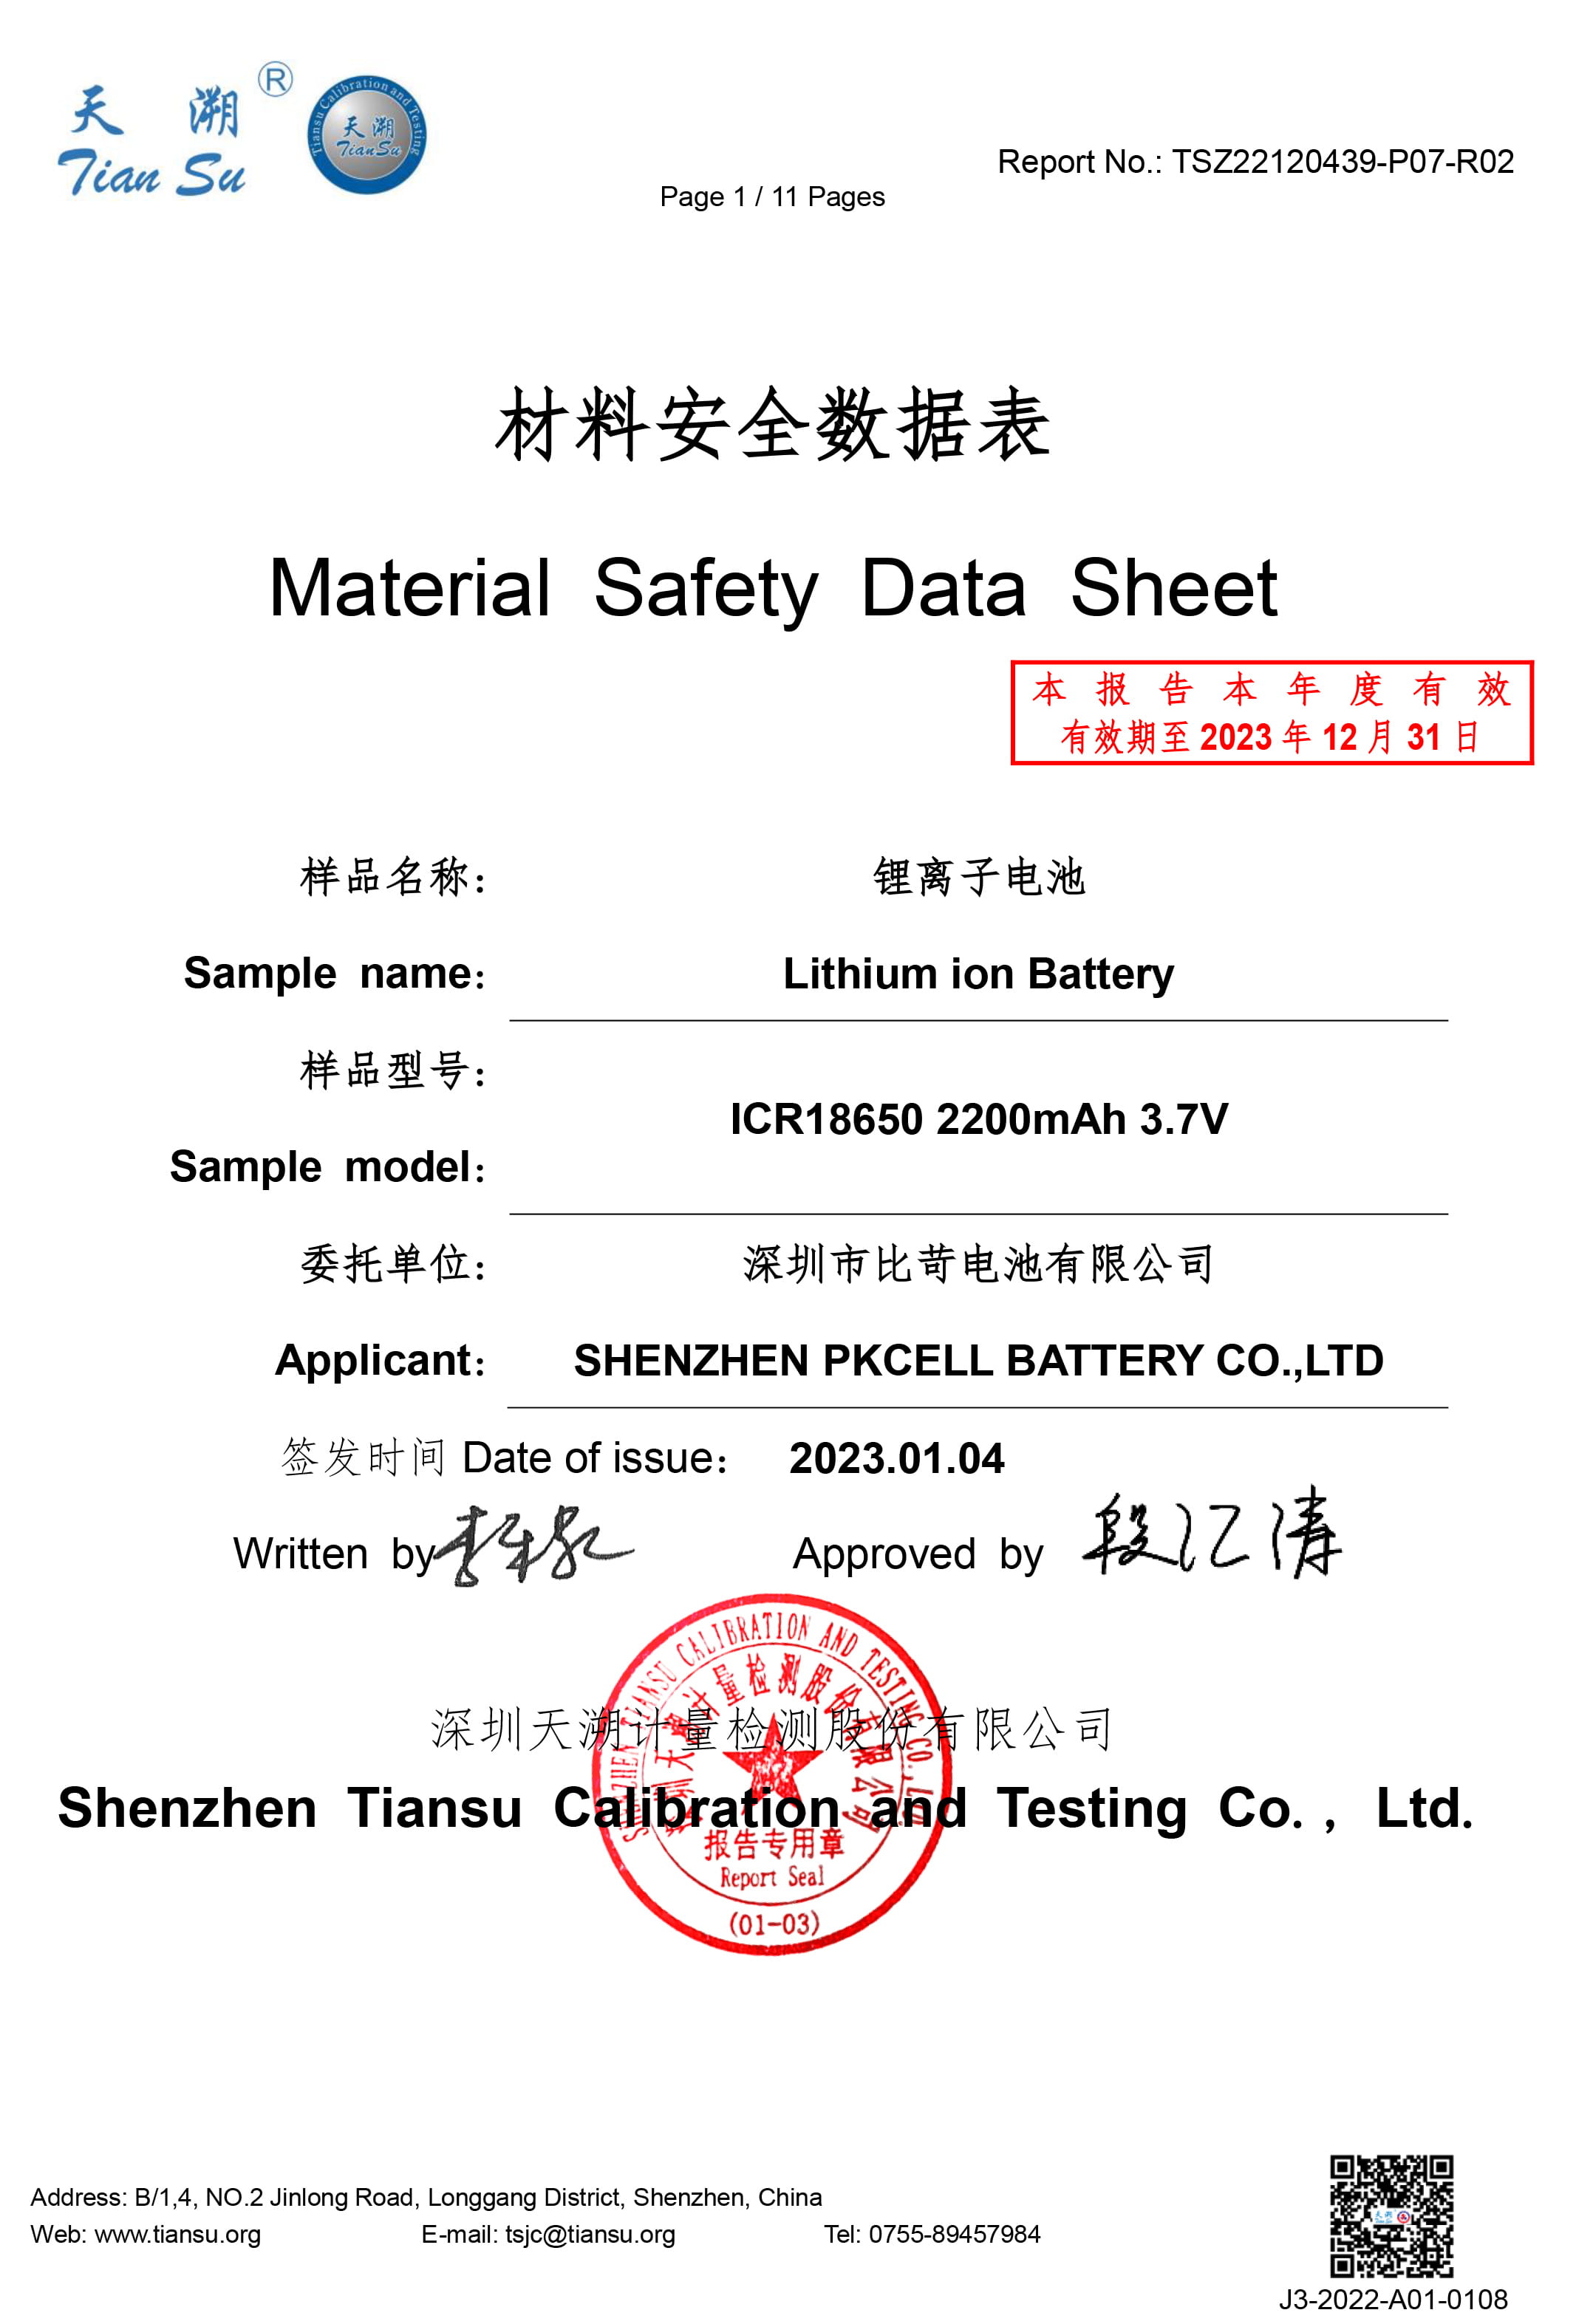 ICR Battery Series MSDS-1